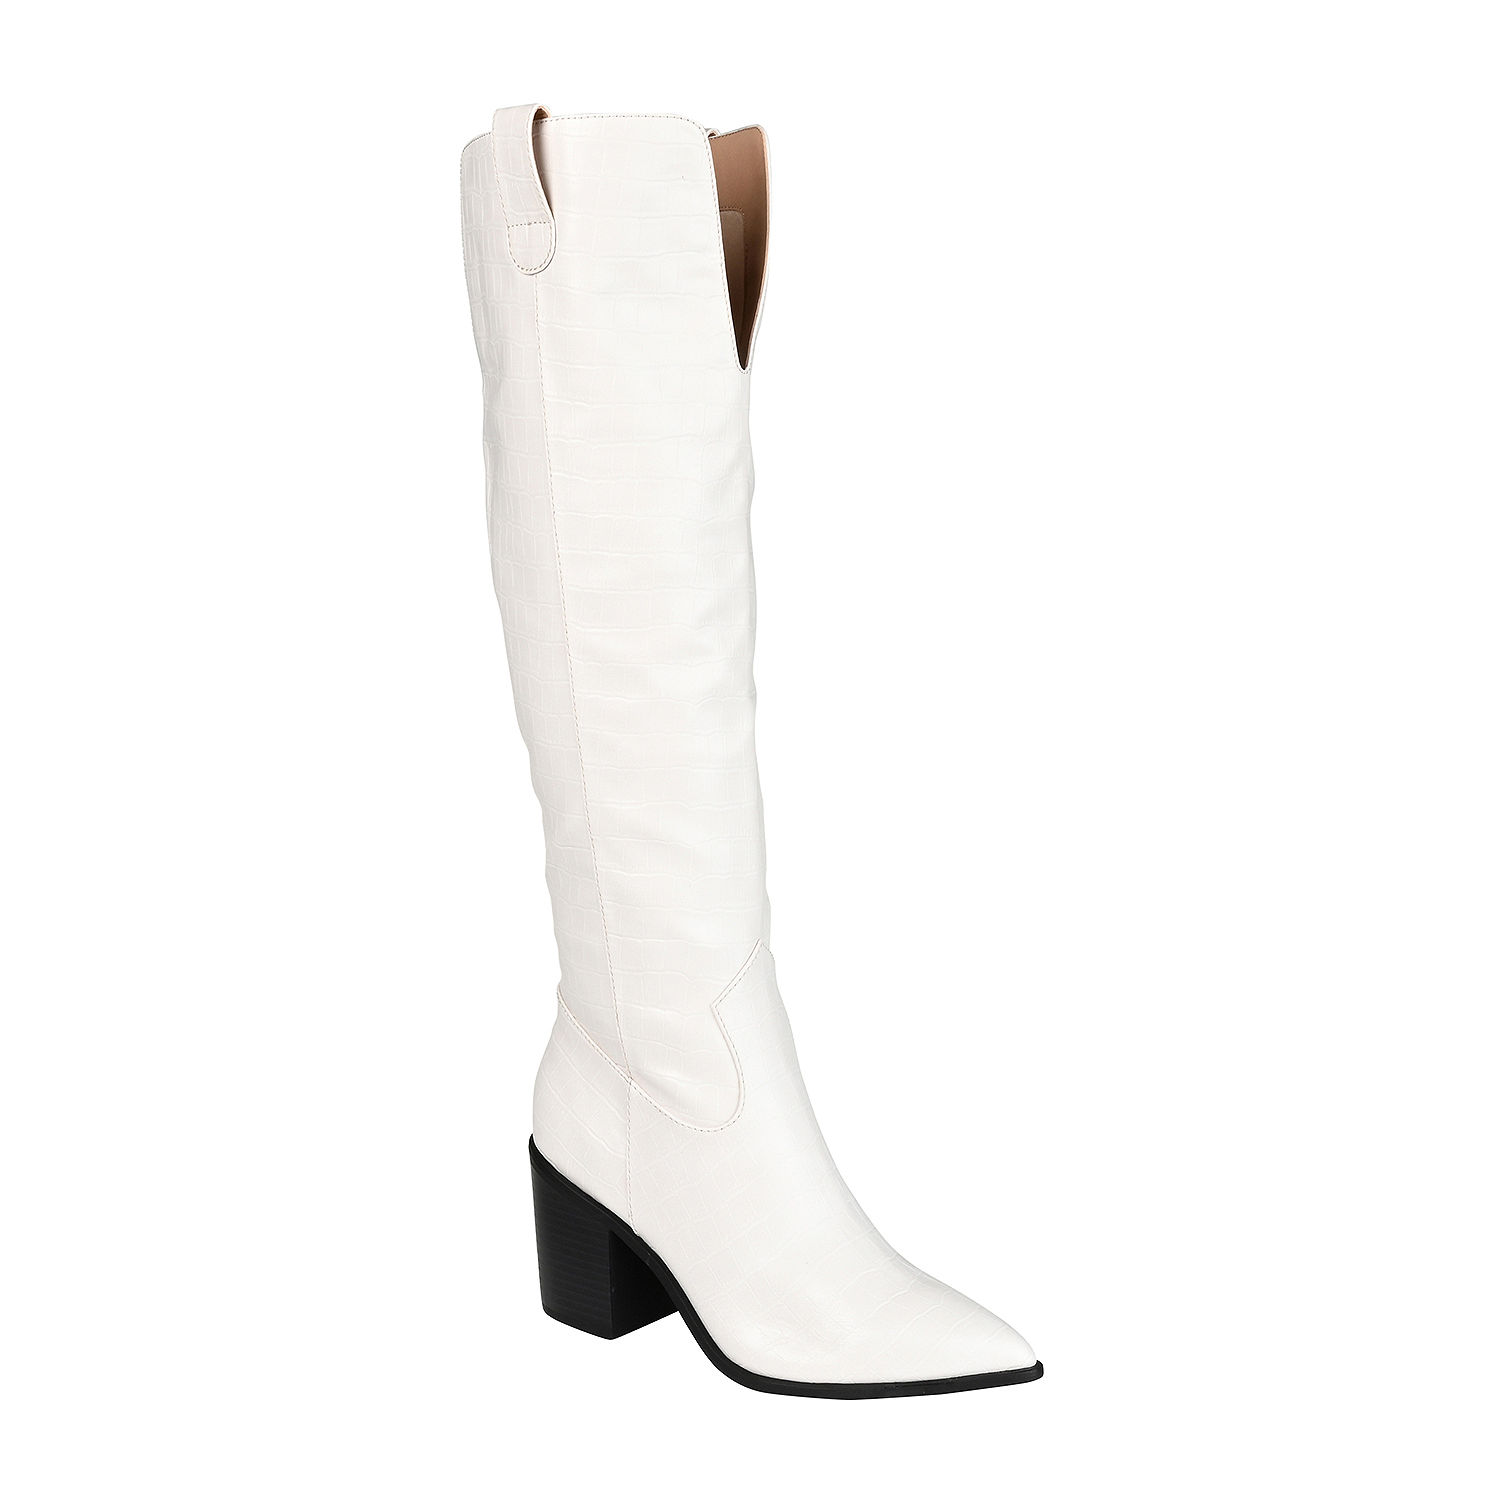 Journee Collection Womens Therese Wide Calf Stacked Heel Riding Boots ...